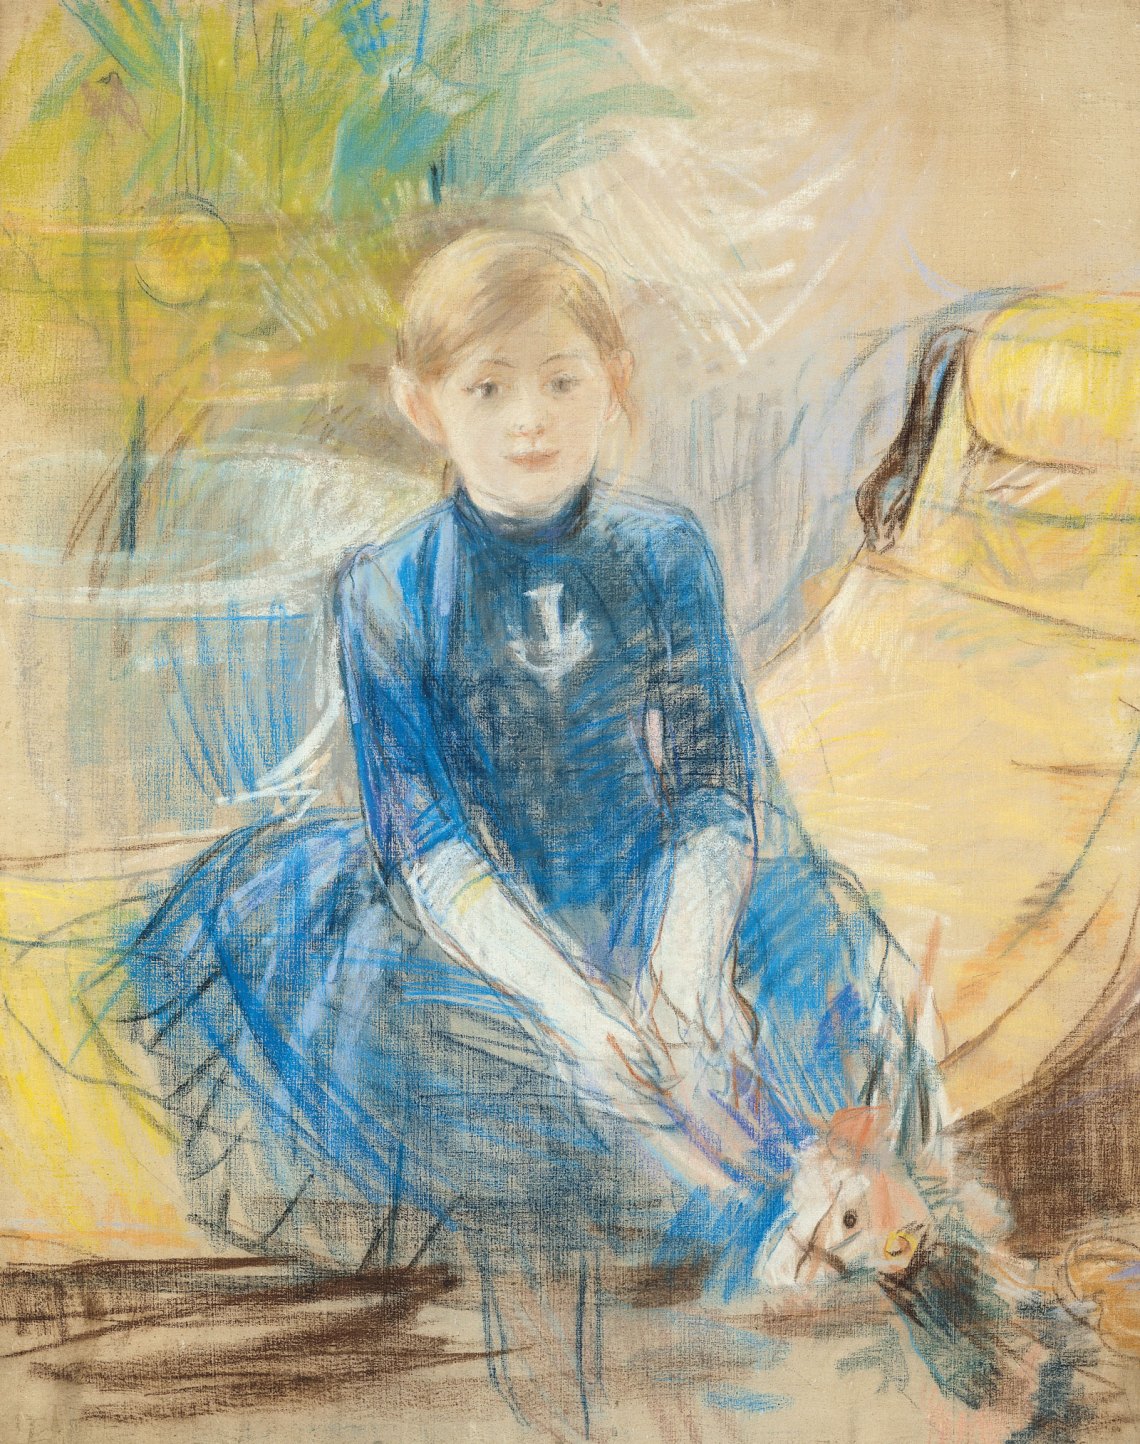 Painting of a girl in a blue dress sitting on a yellow chair